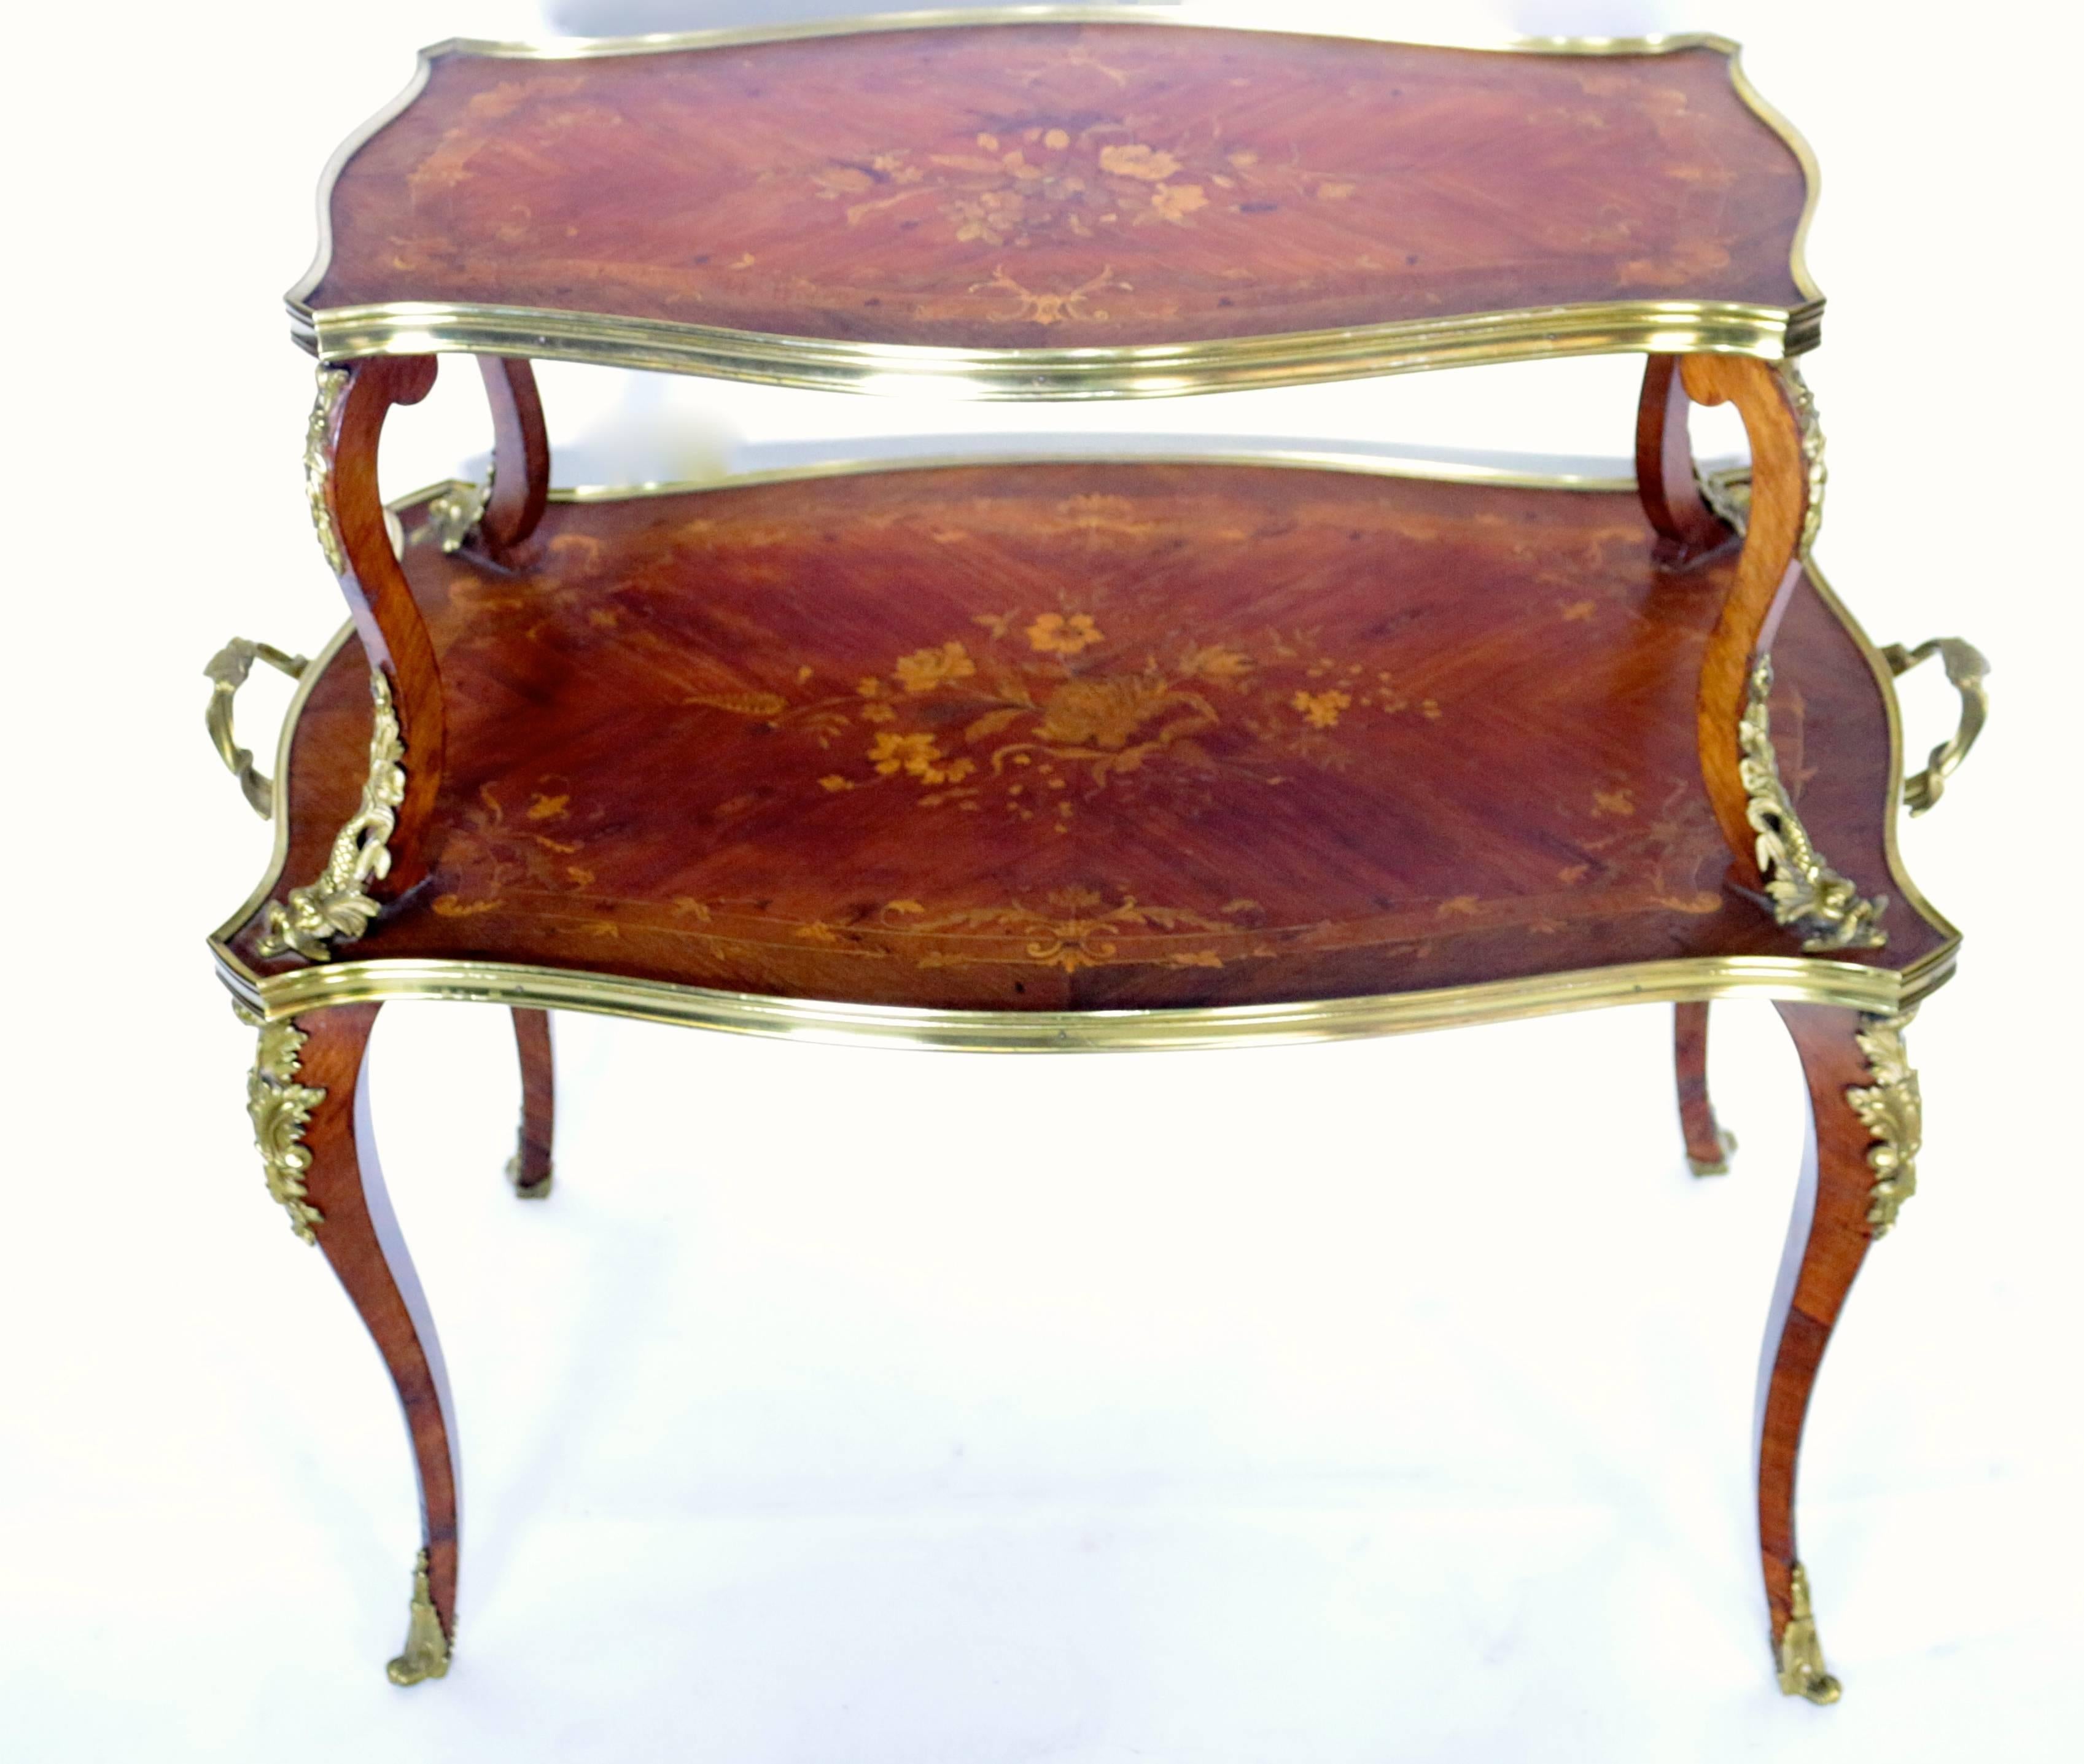 This elegant and beautiful two-tier table if magnificent. The floral design is hand-carved into the table and is lightly colored in to show subtle hints of the design. What catches the eye the most is the handmade brass molds and lining. From the